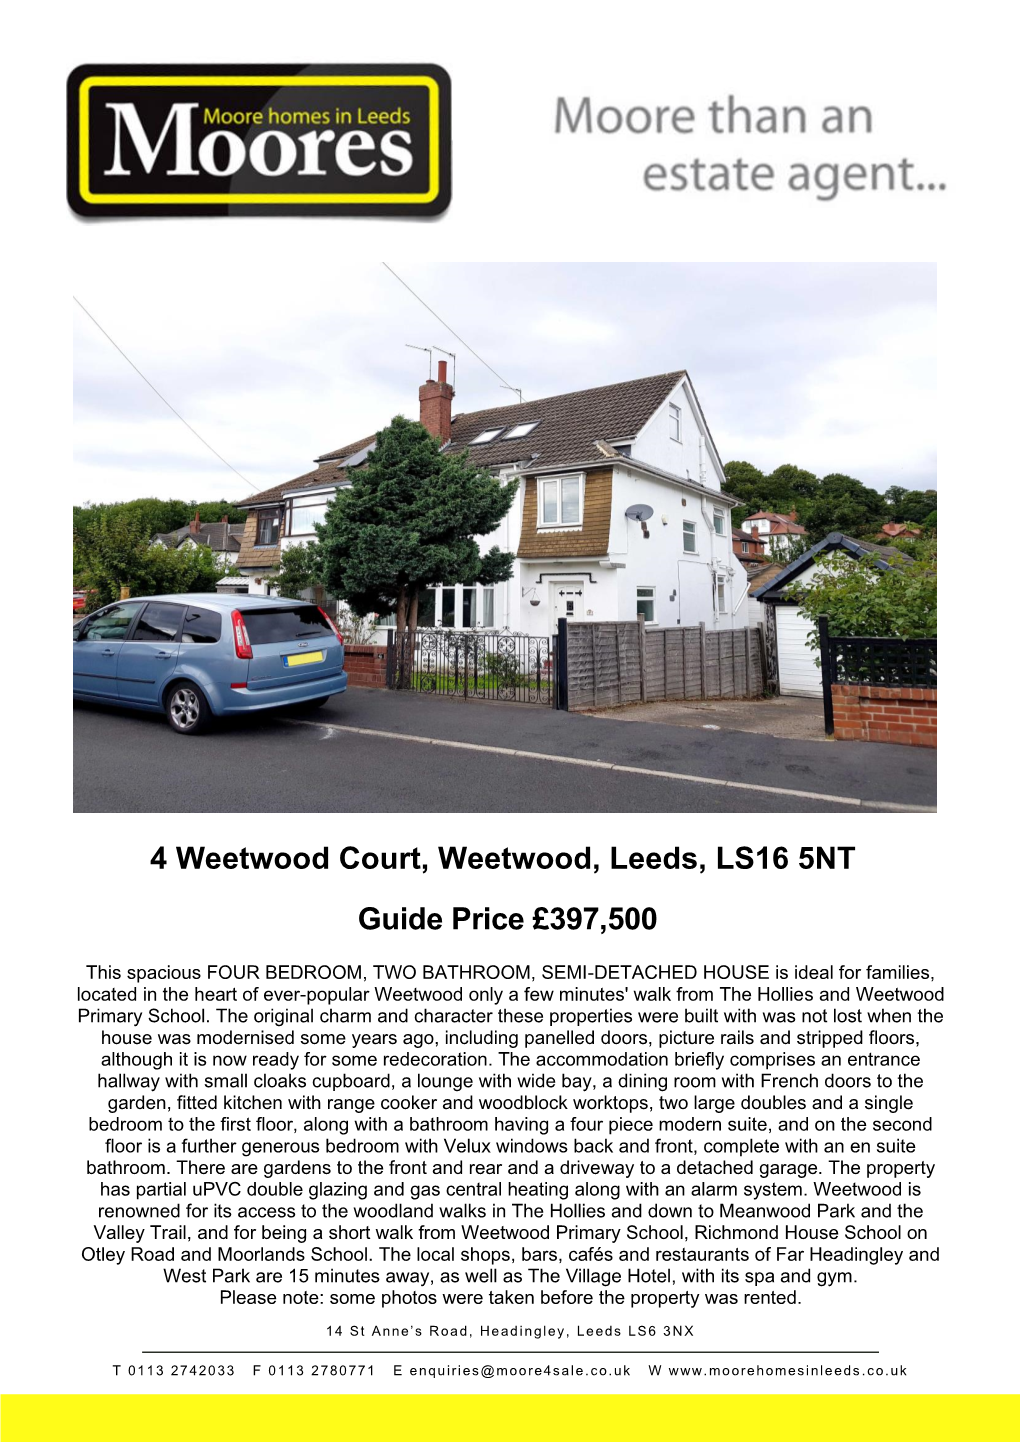 4 Weetwood Court, Weetwood, Leeds, LS16 5NT Guide Price £397,500